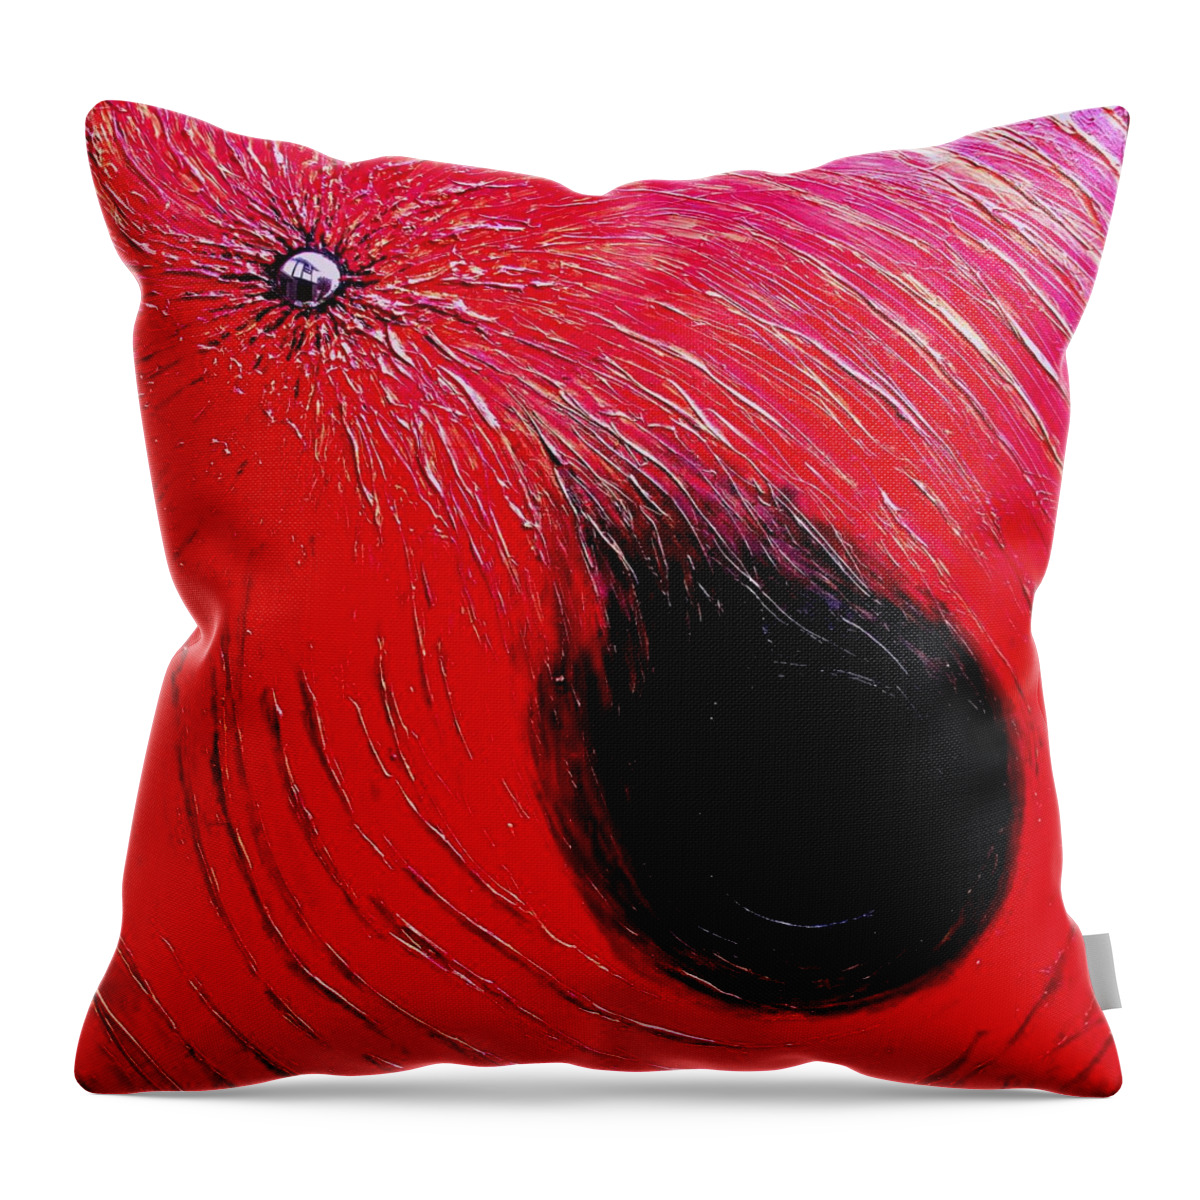 Abstract Throw Pillow featuring the painting Falling In to Passion by Ian MacDonald